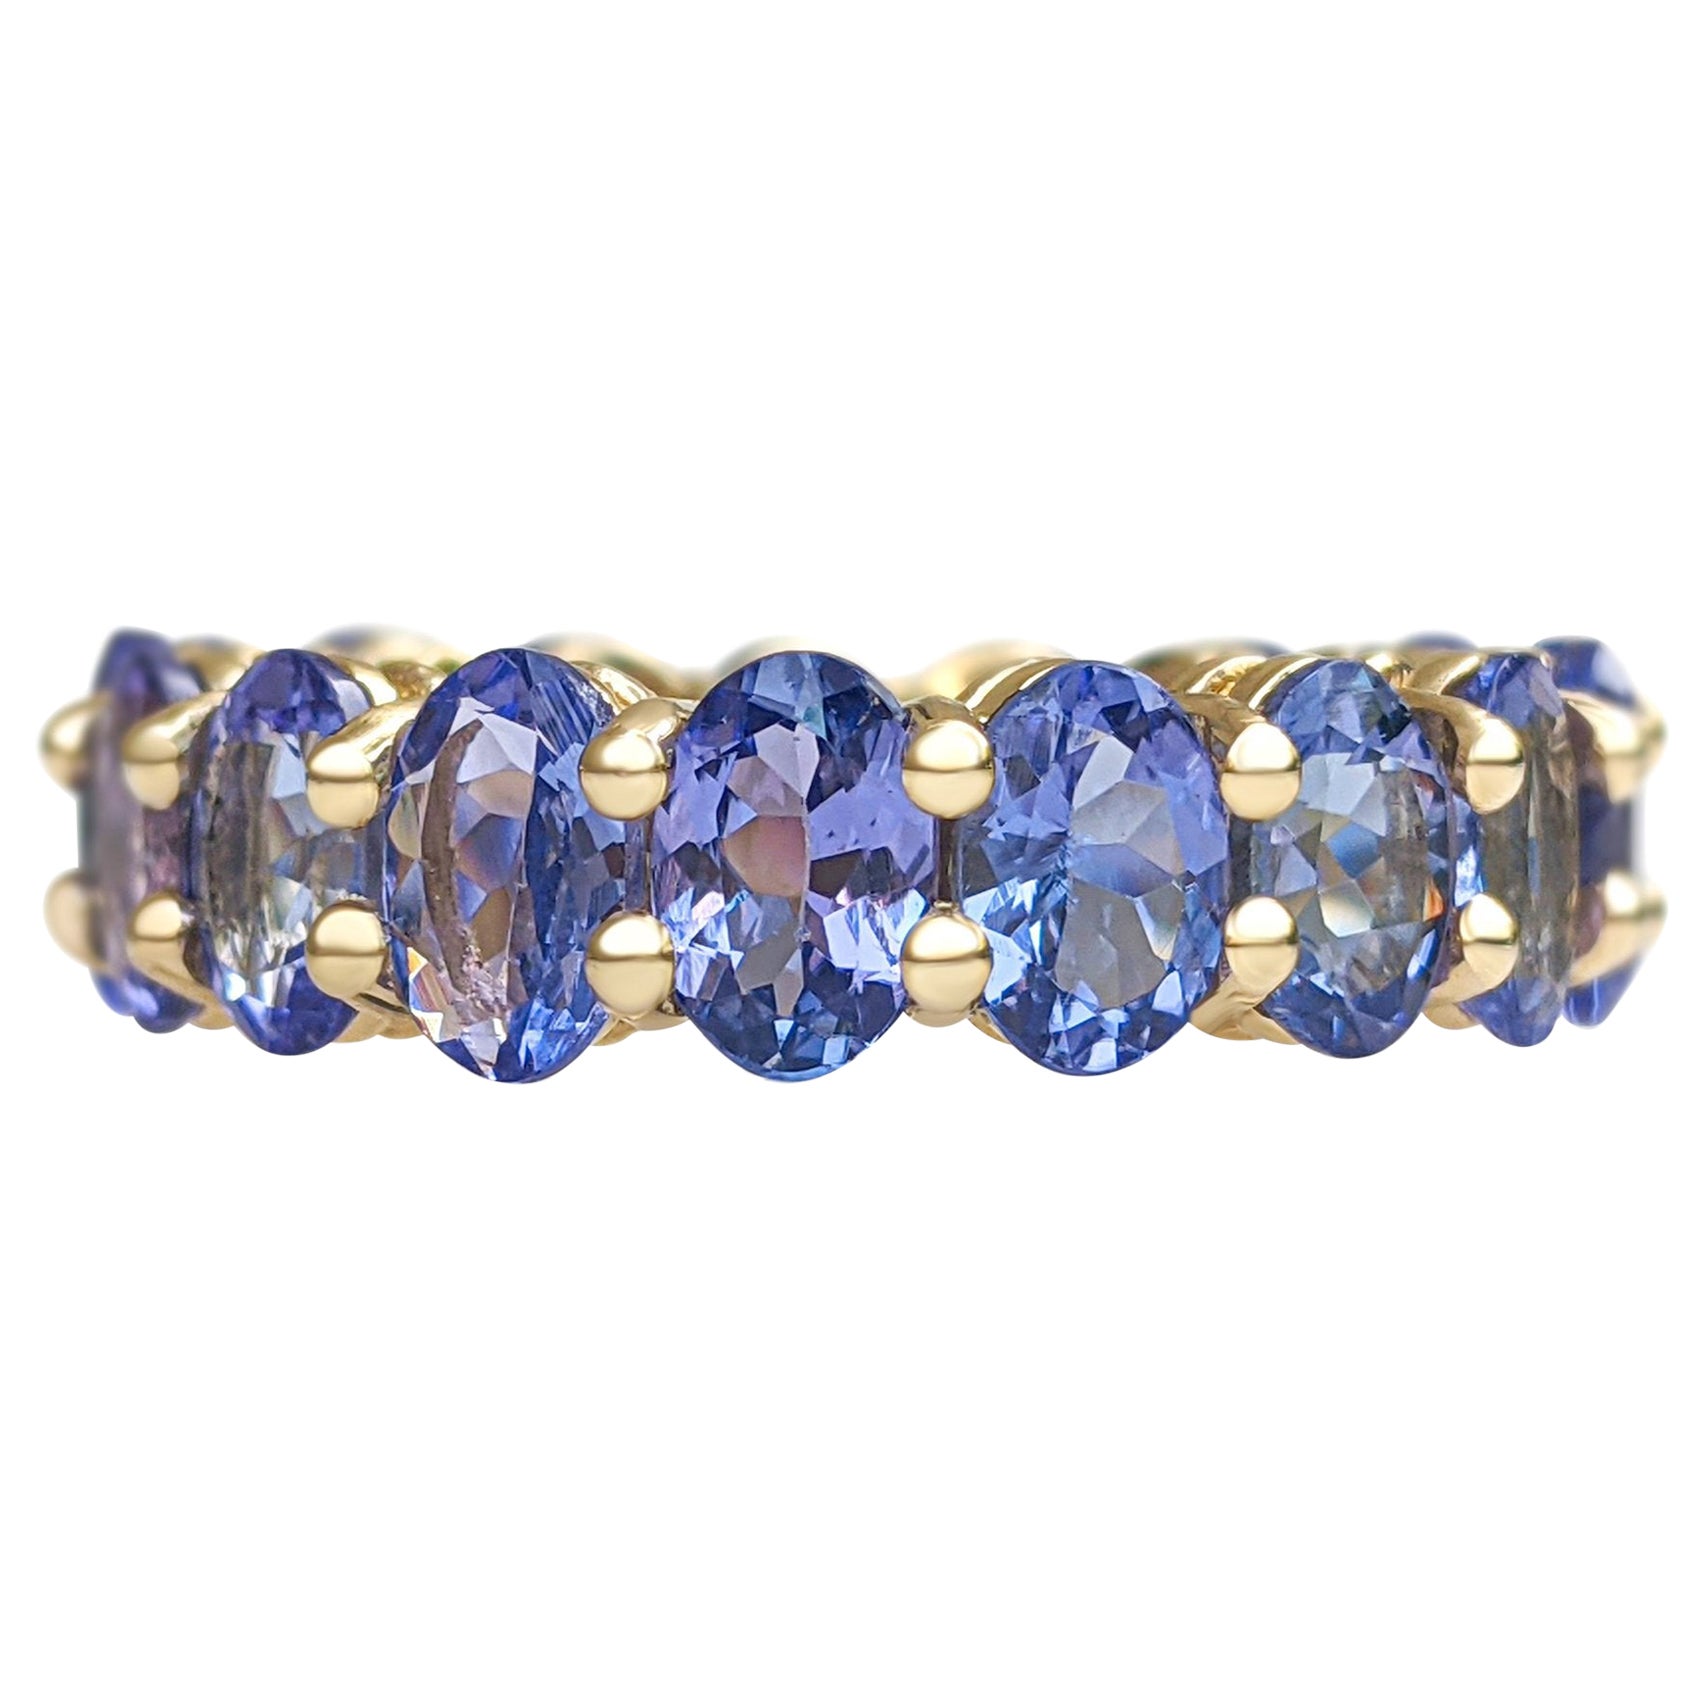 NO RESERVE! 8.18 Carat Tanzanite Eternity Band - 14 kt. Yellow Gold - Ring For Sale